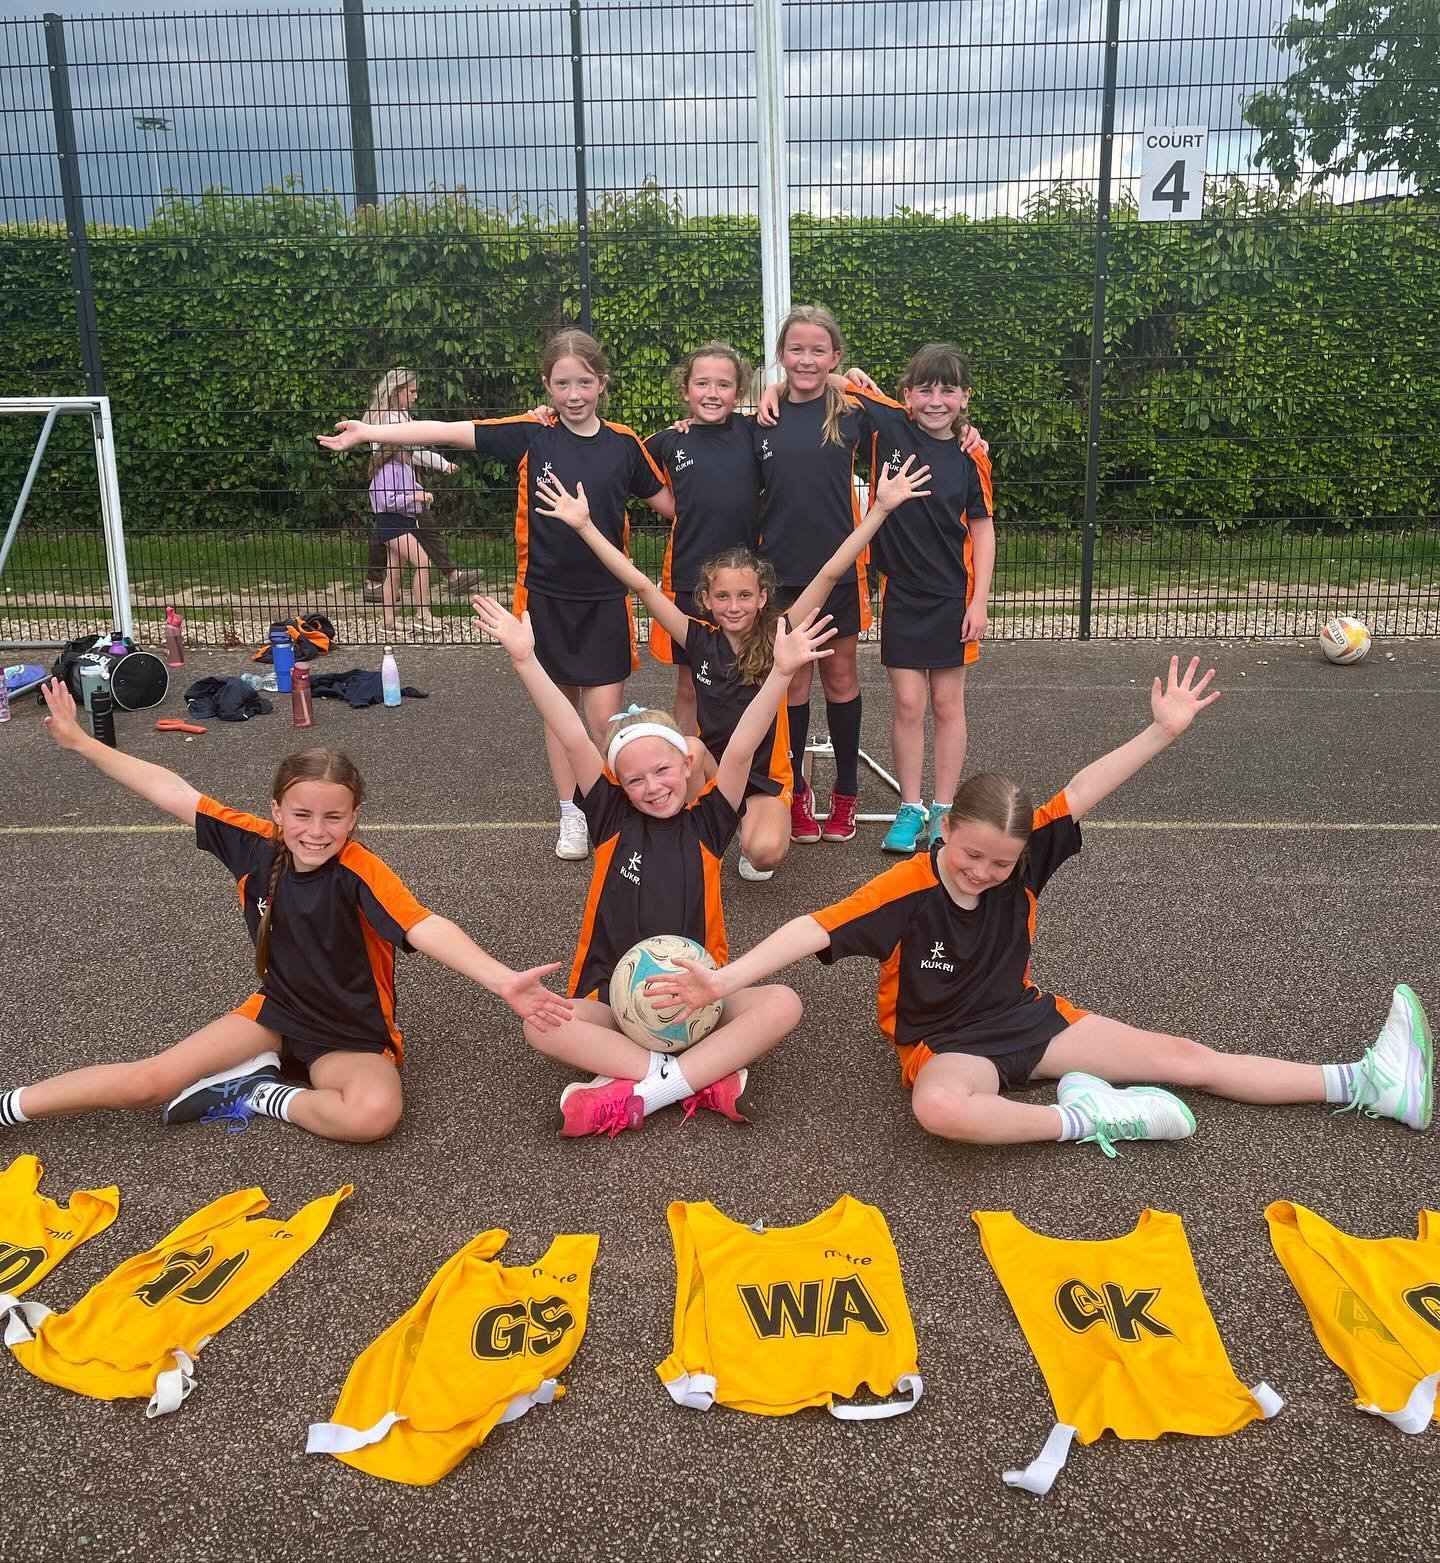 Another 2 games this evening for the U9s.
The oranges played well against Turnford, securing a 11-1 win. Great efforts girls! The Navy&rsquo;s played against Tegate this week and were unable to get the win, but still put together some moments of exce